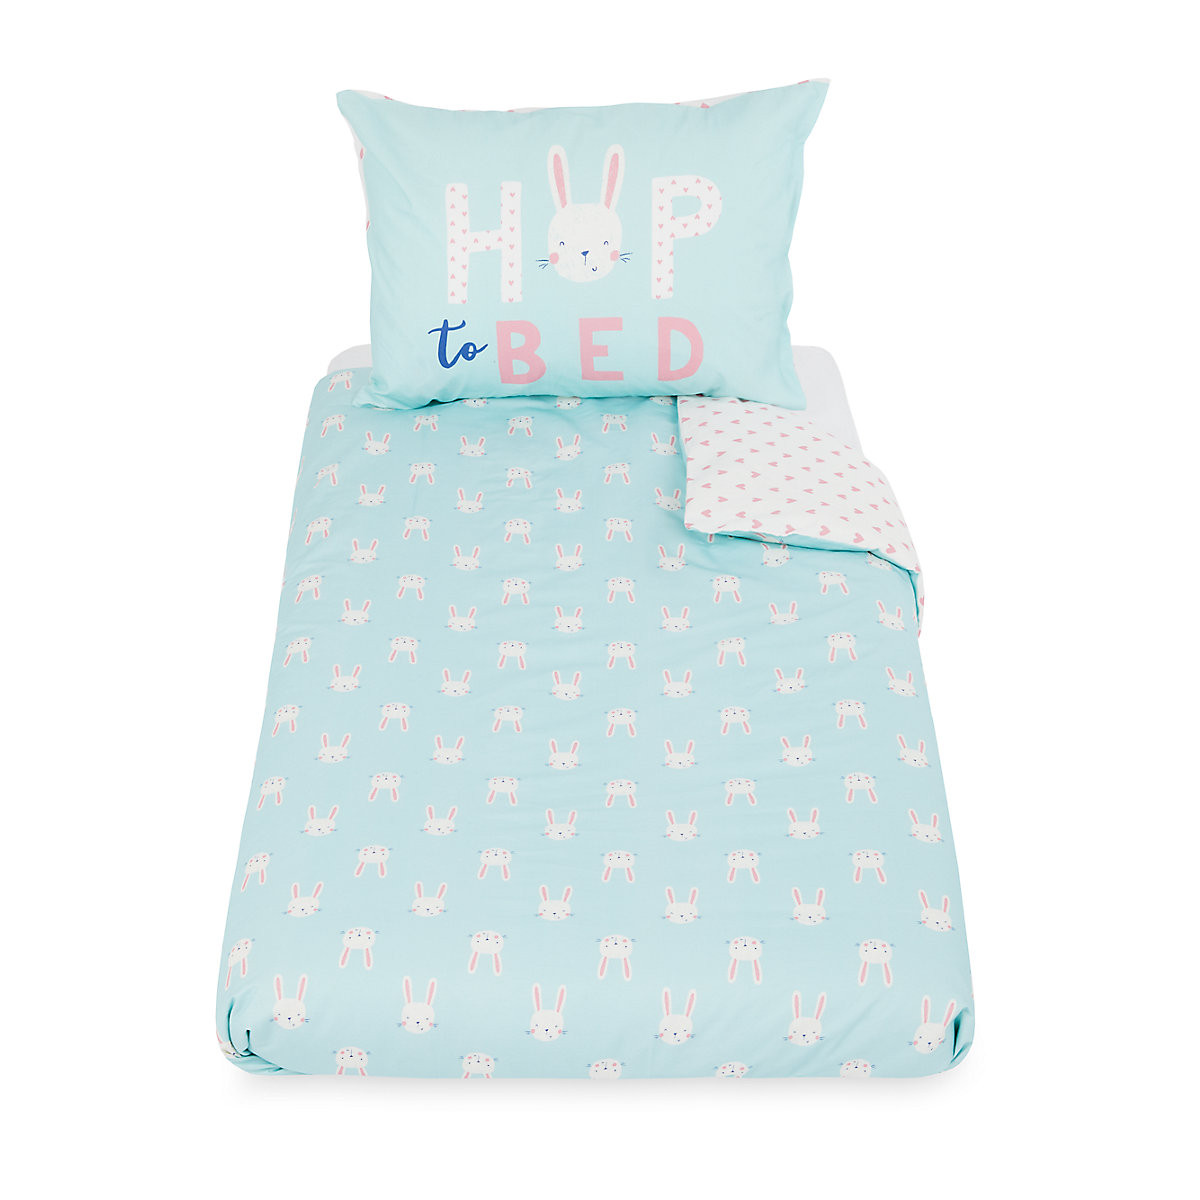 mothercare cot bed duvet cover